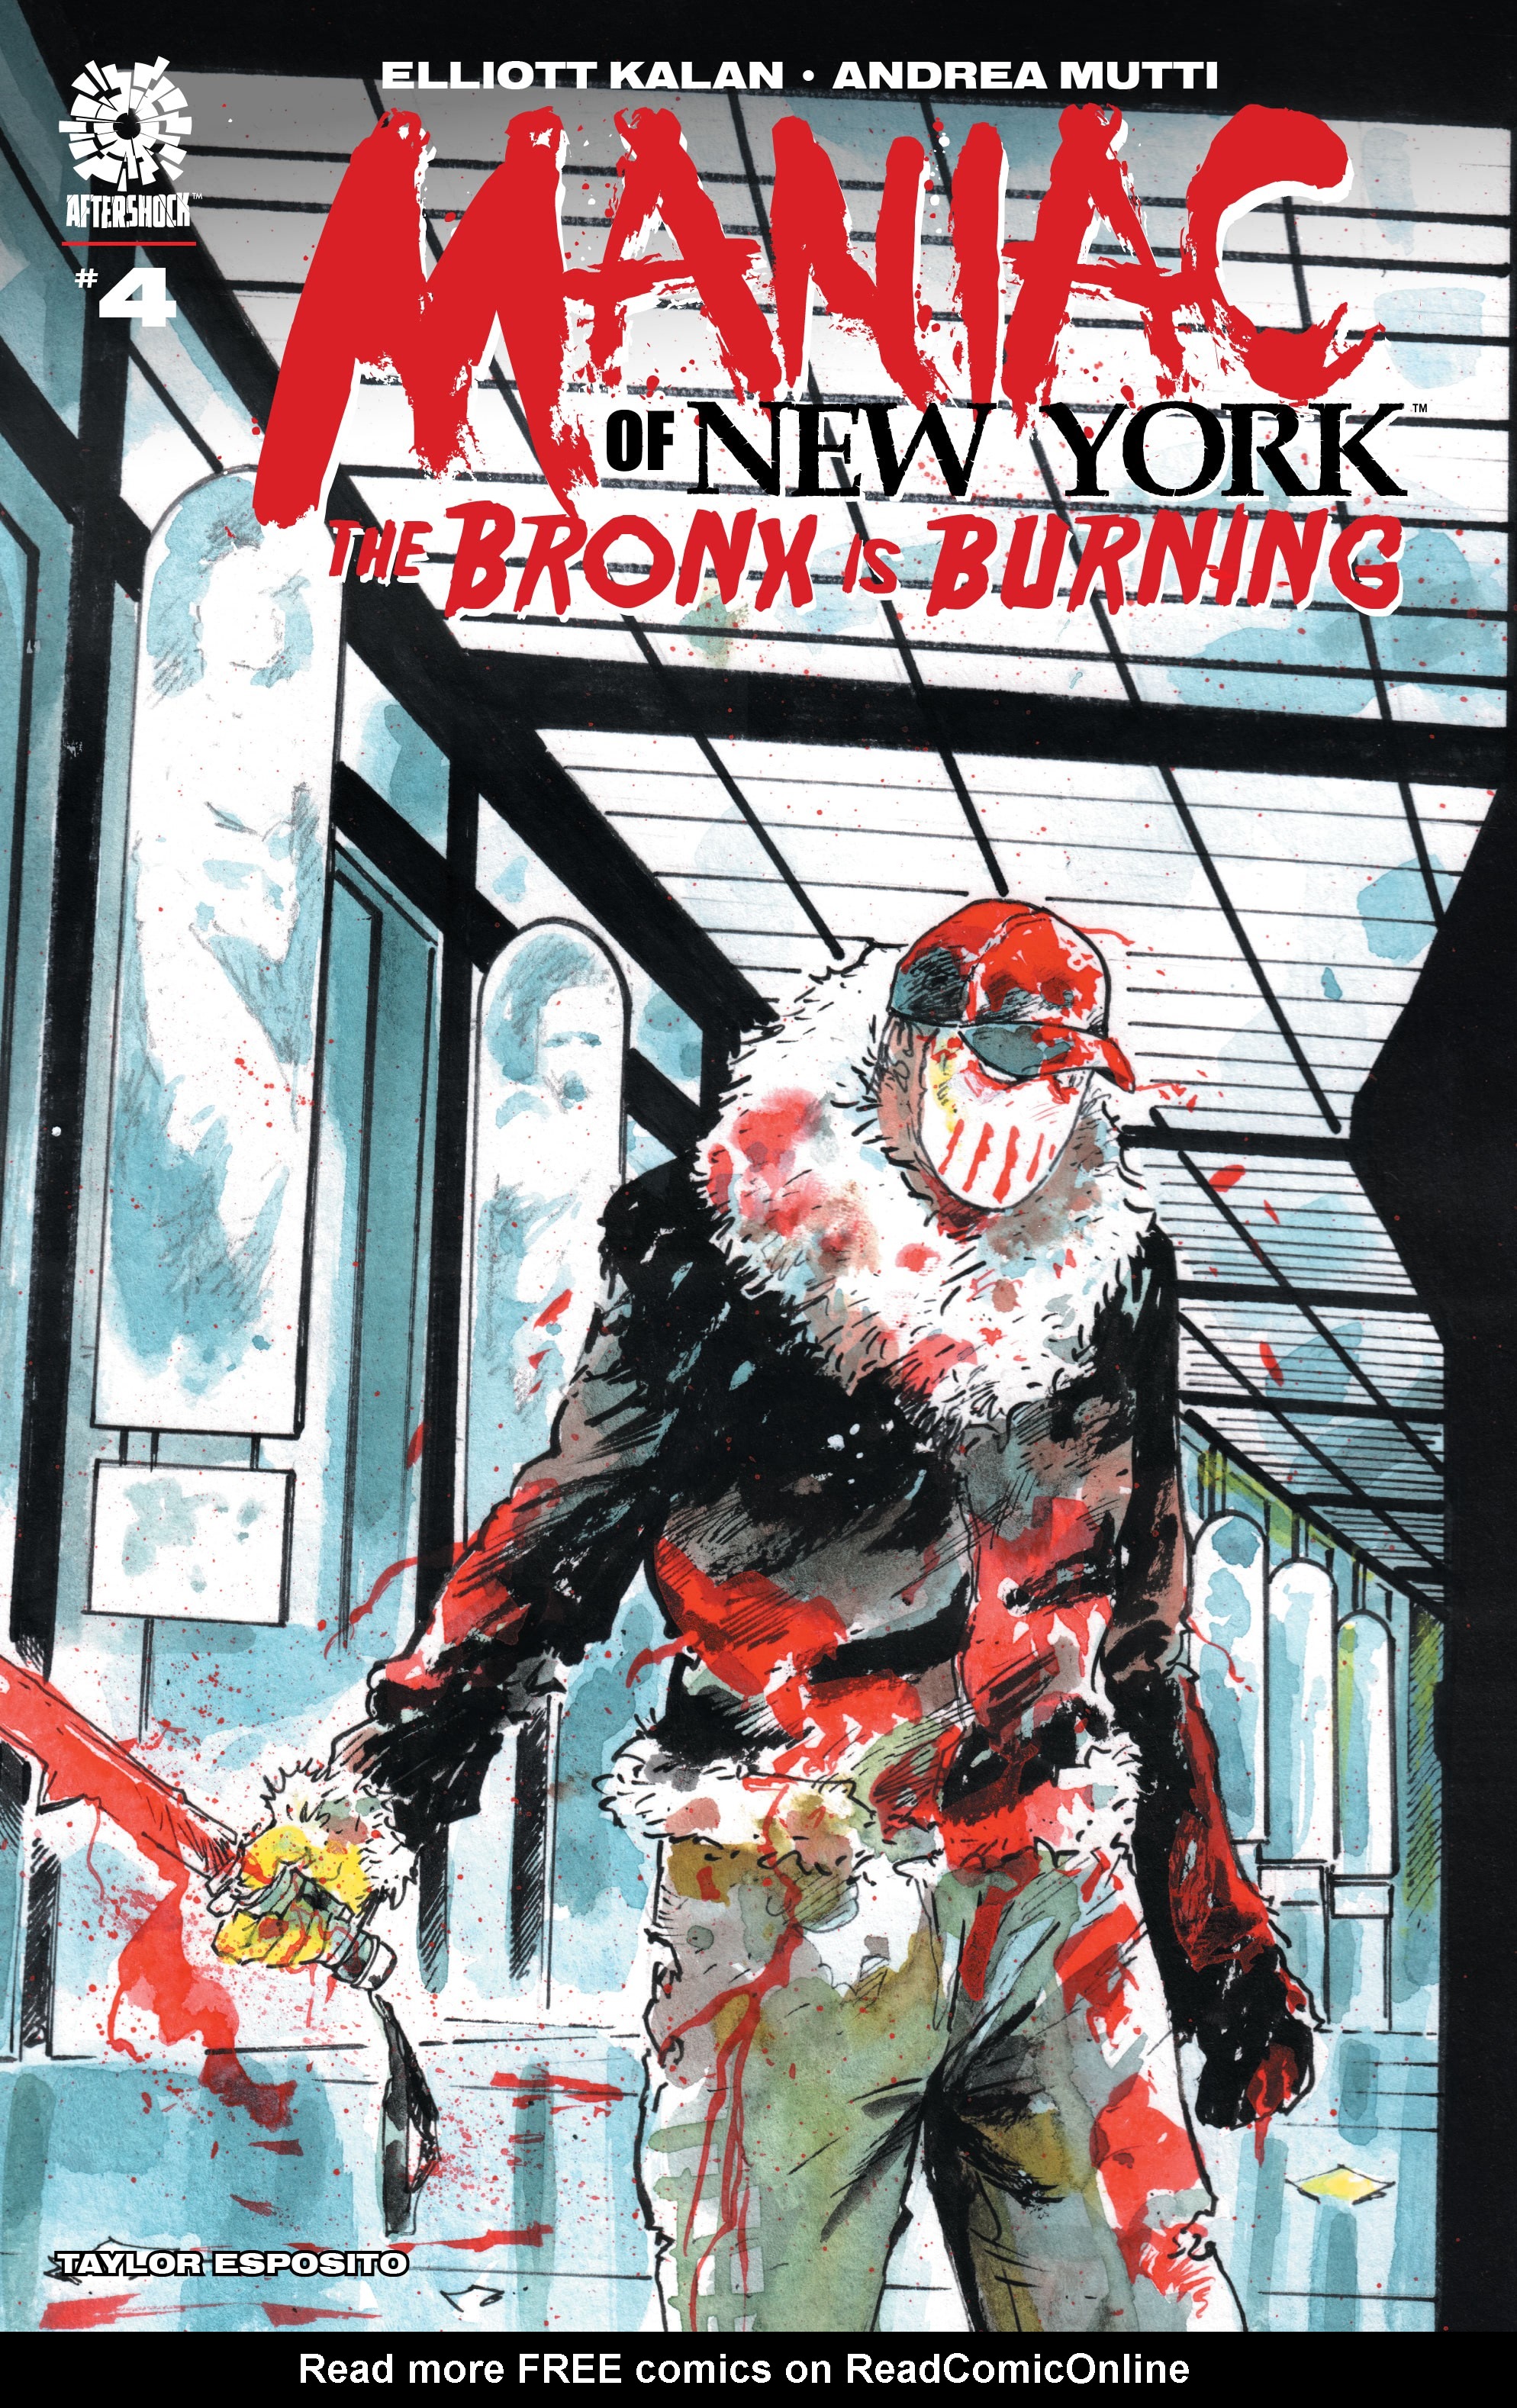 Read online Maniac of New York: The Bronx is Burning comic -  Issue #4 - 1